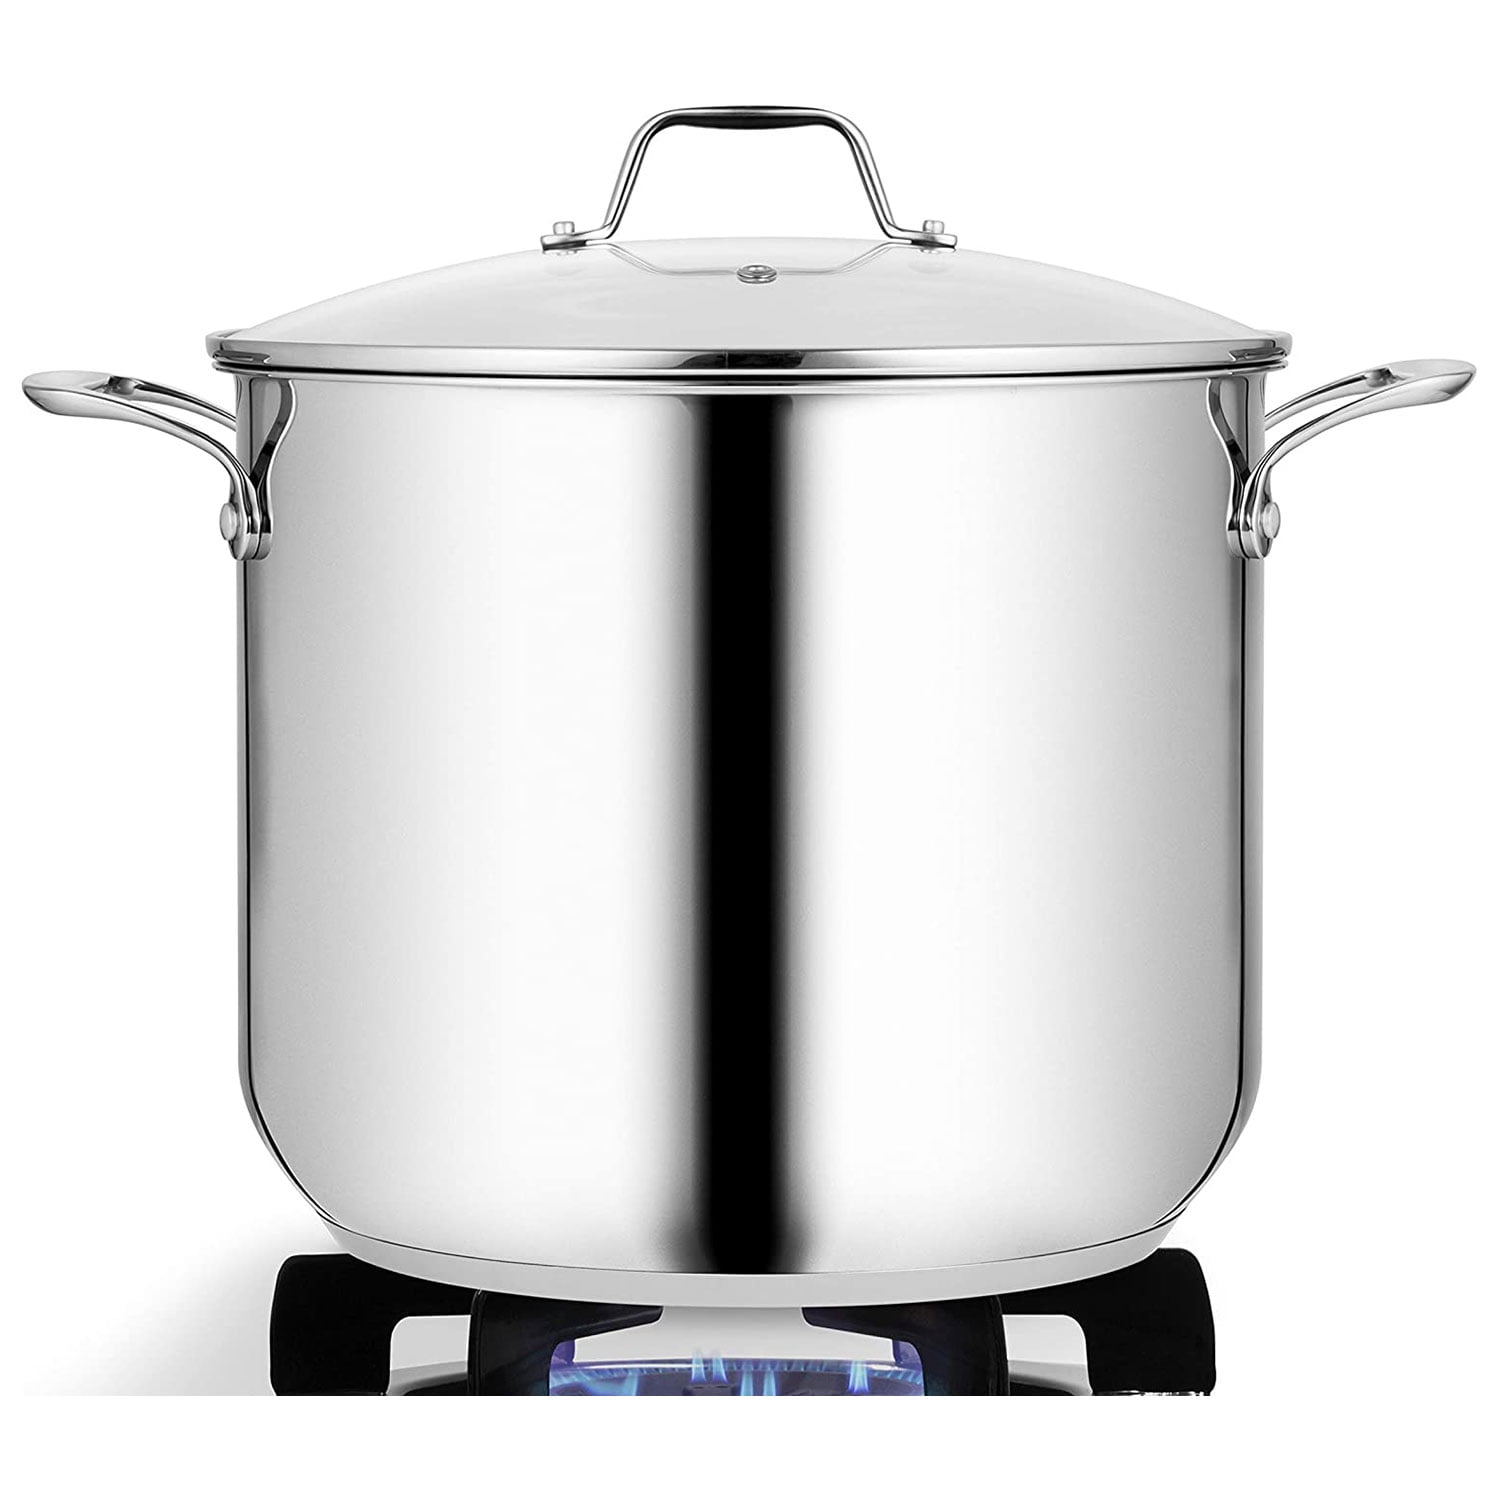  1 X New Professional Commercial Grade 8 QT (Quart) Heavy-Gauge  Stainless Steel Stock Pot, 3-Ply Clad Base, Induction Ready, With Lid Cover  NSF Certified Item: Induction Cookware: Home & Kitchen